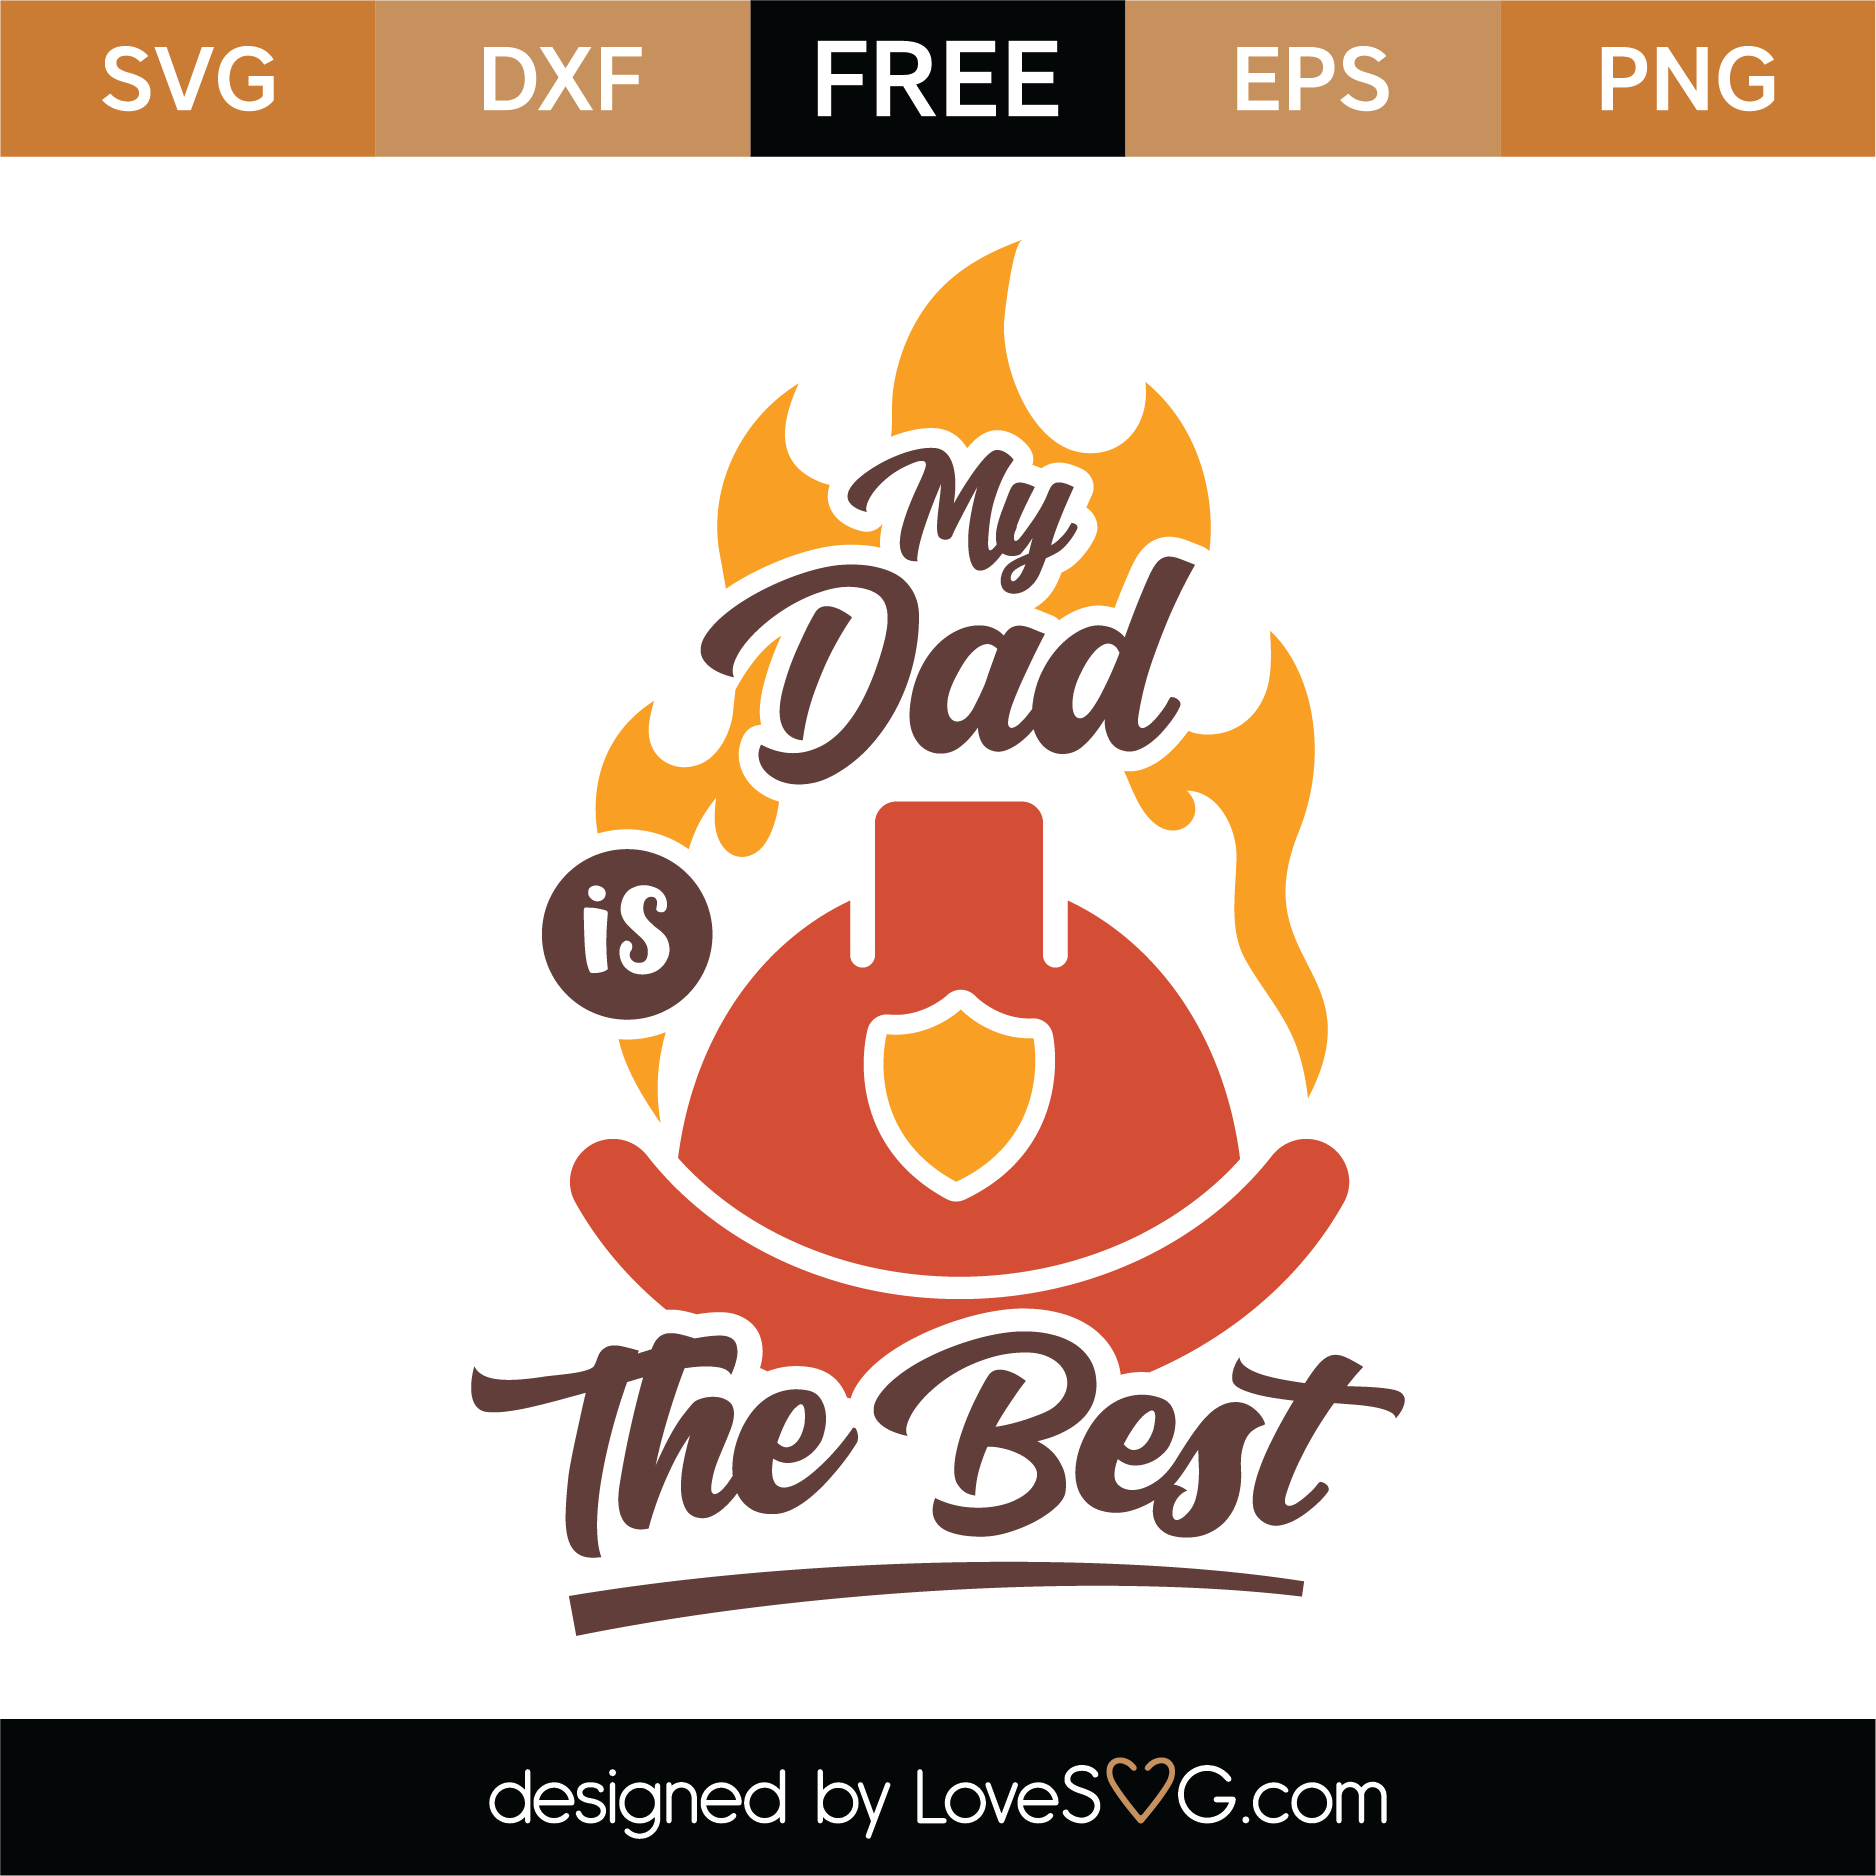 Download Free My Dad Is The Best SVG Cut File | Lovesvg.com